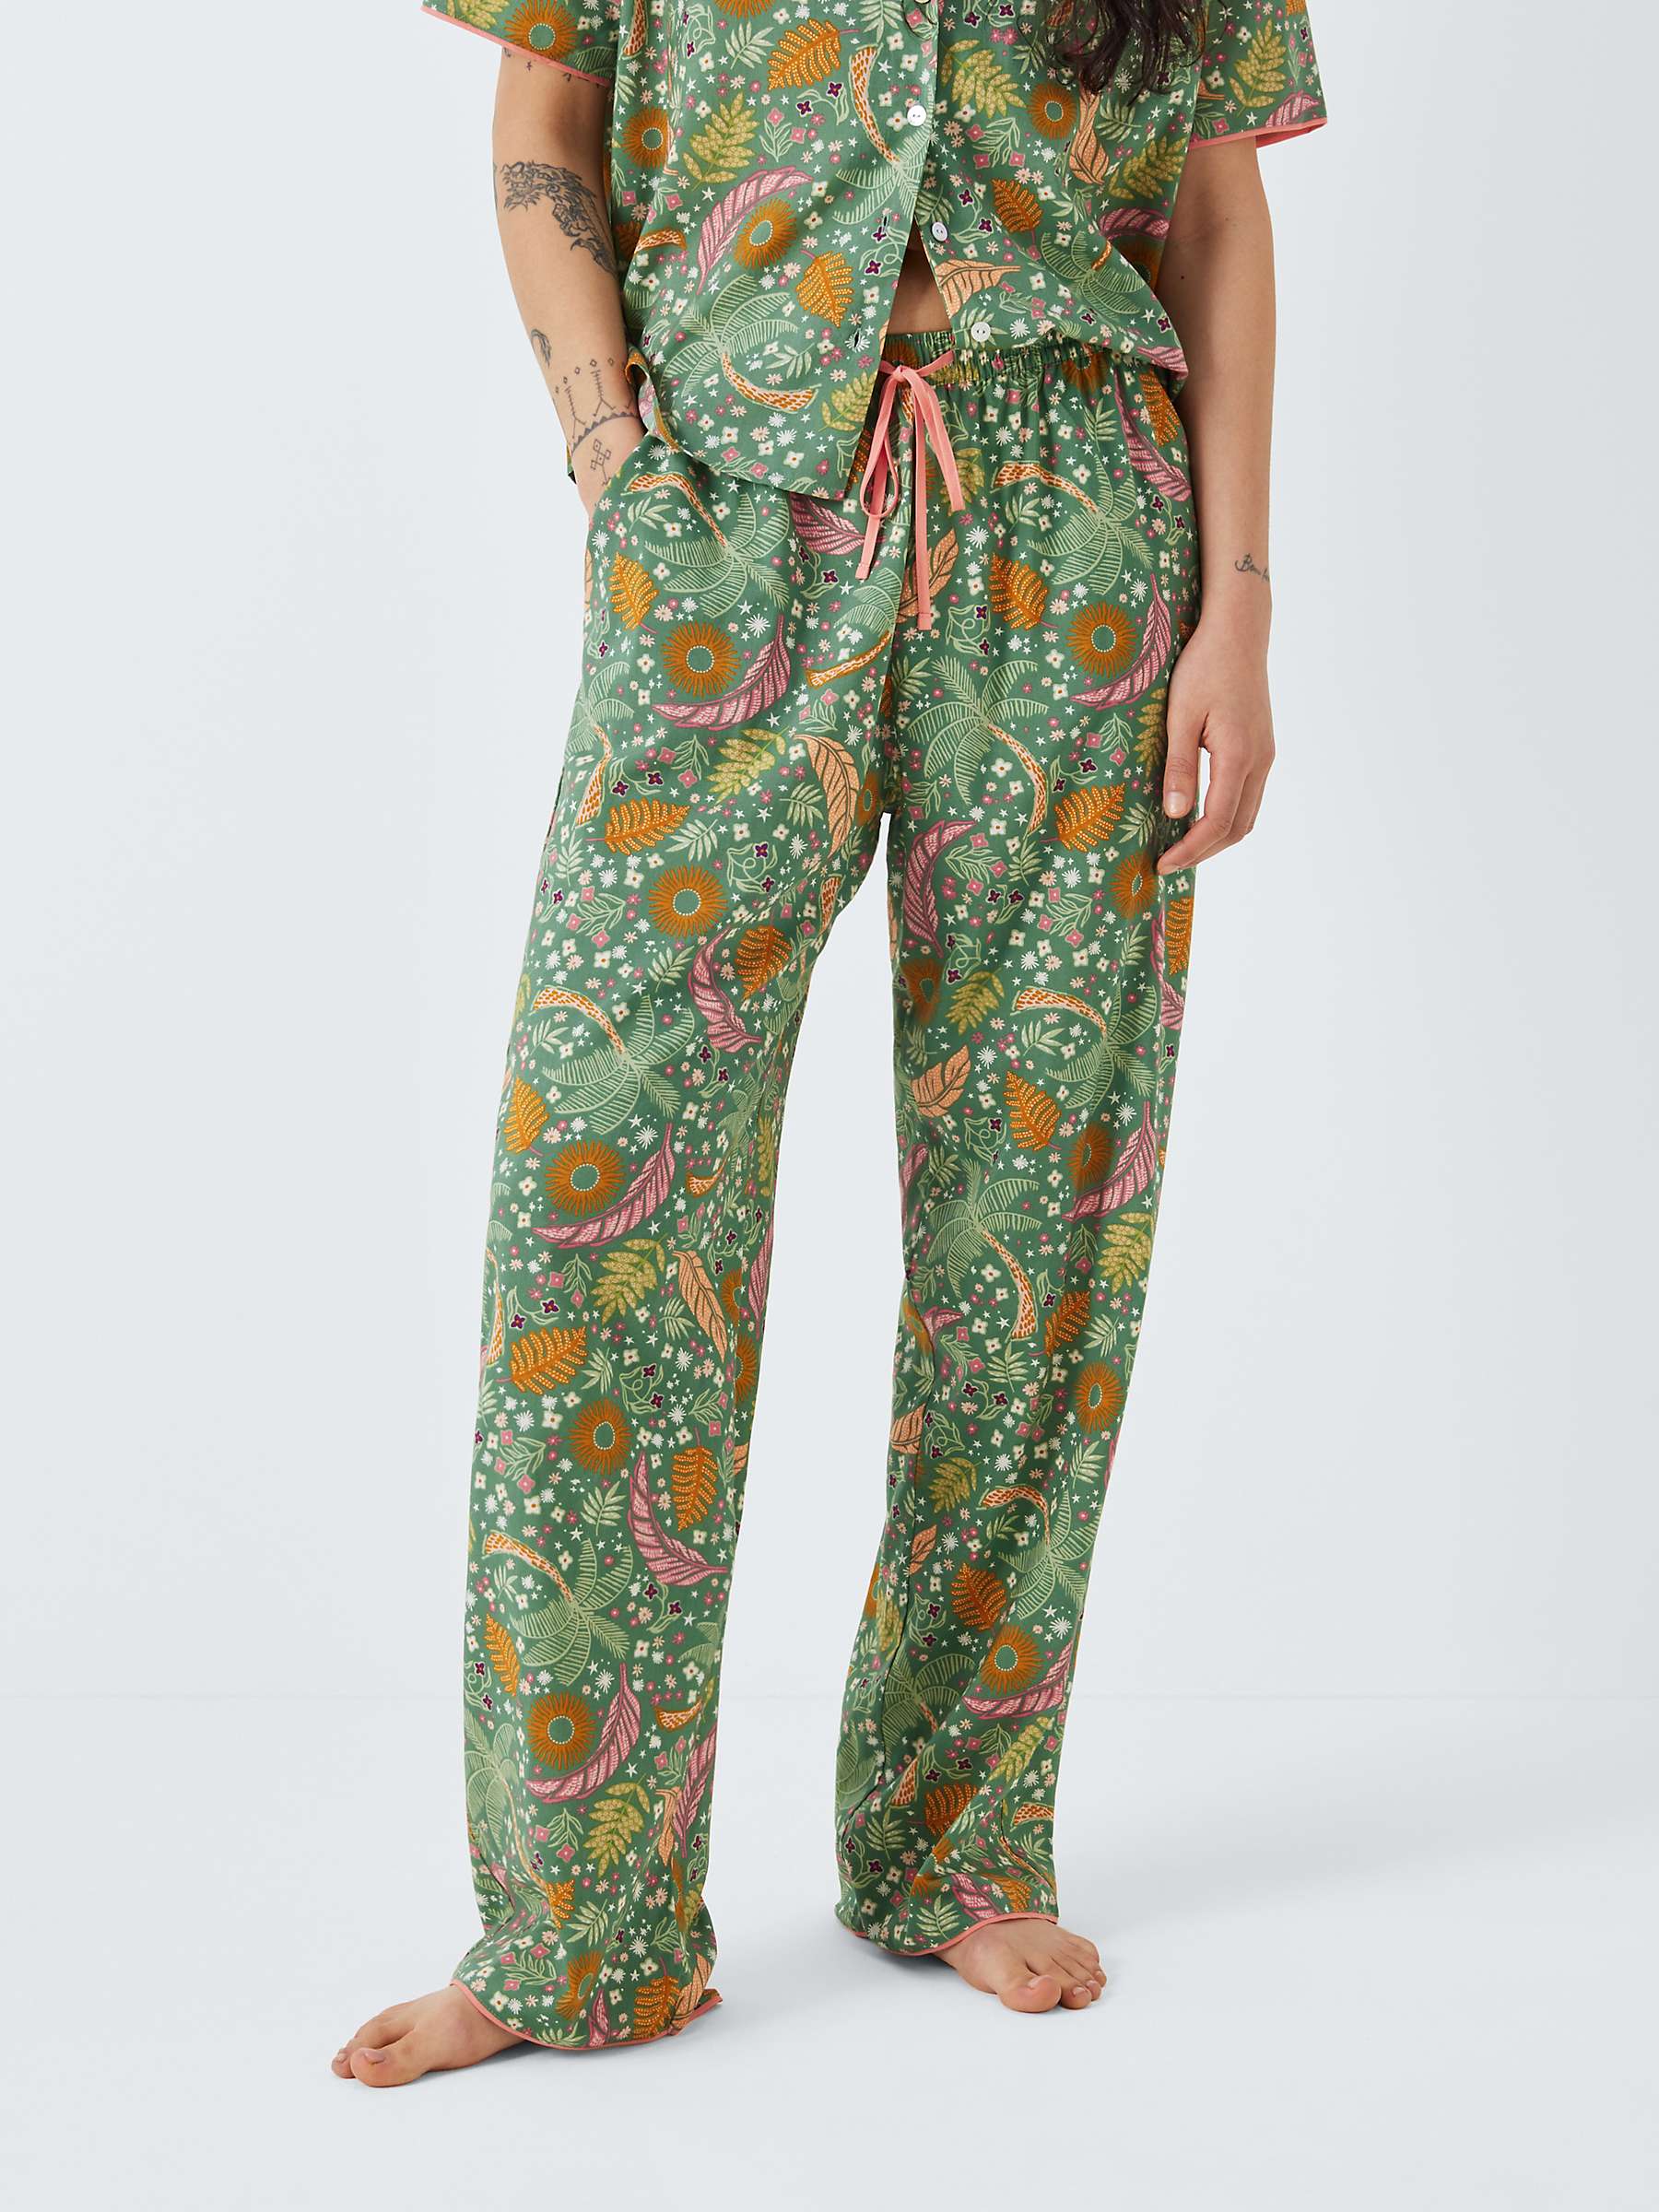 Buy AND/OR Summers Dream Pyjama Bottoms, Khaki Online at johnlewis.com